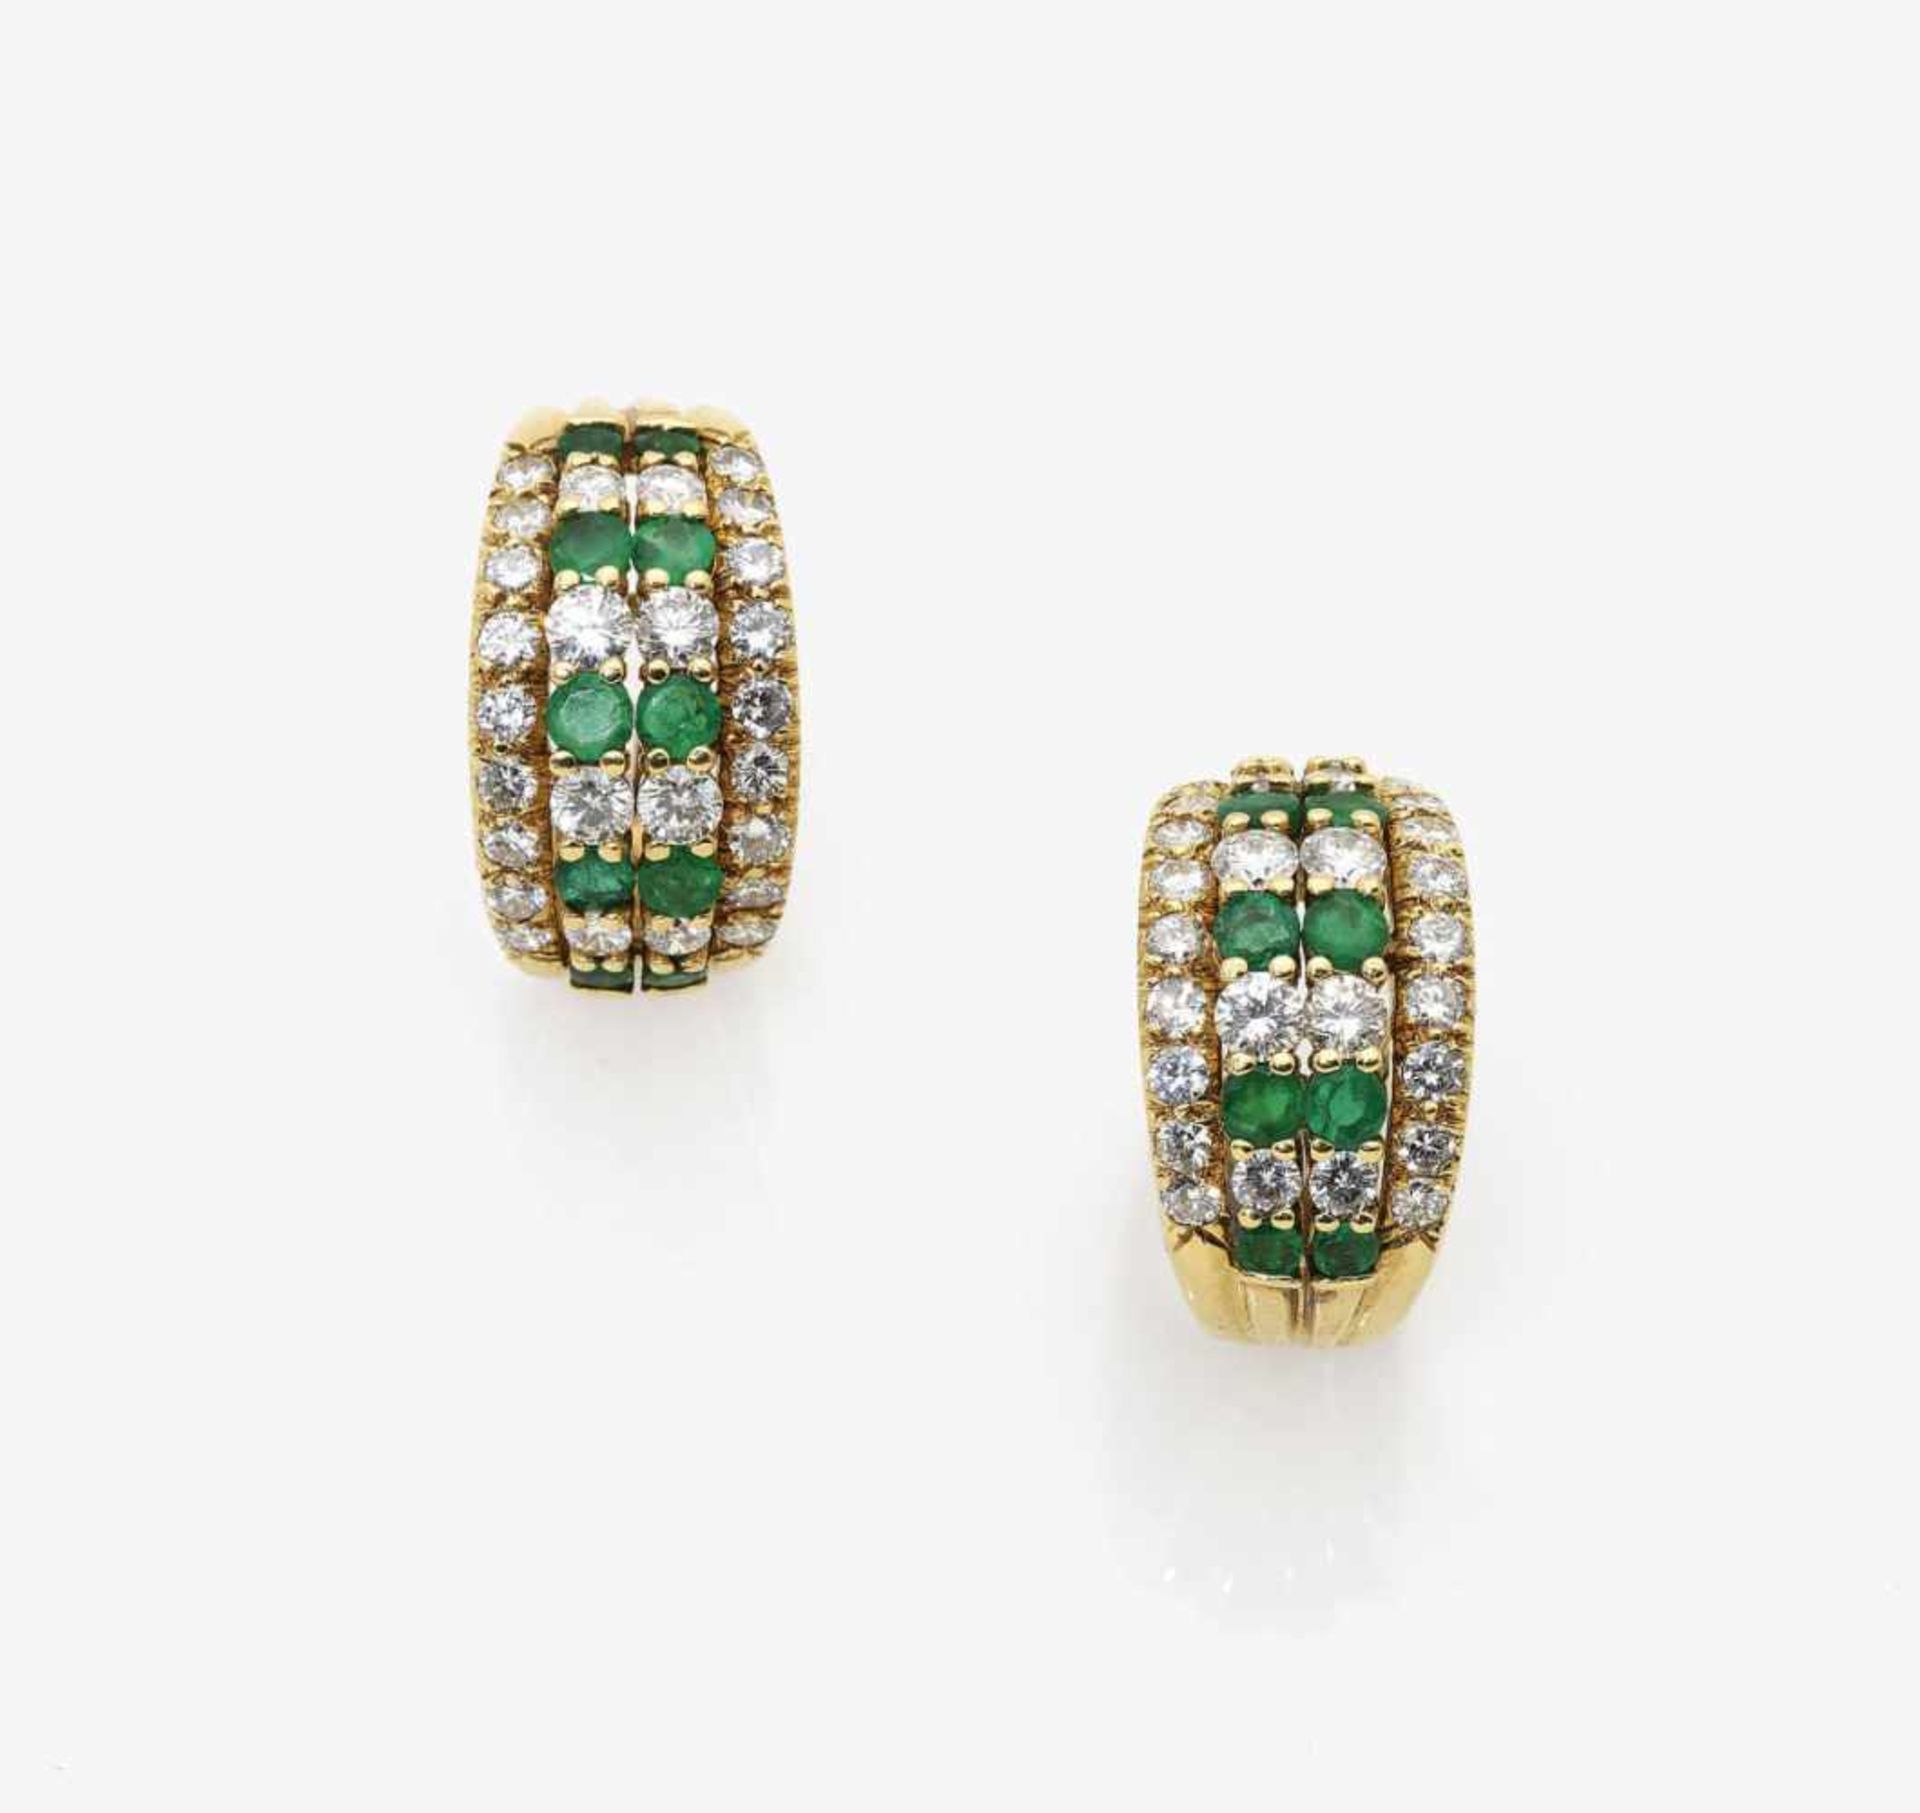 A Pair of Emerald and Diamond Ear Clips